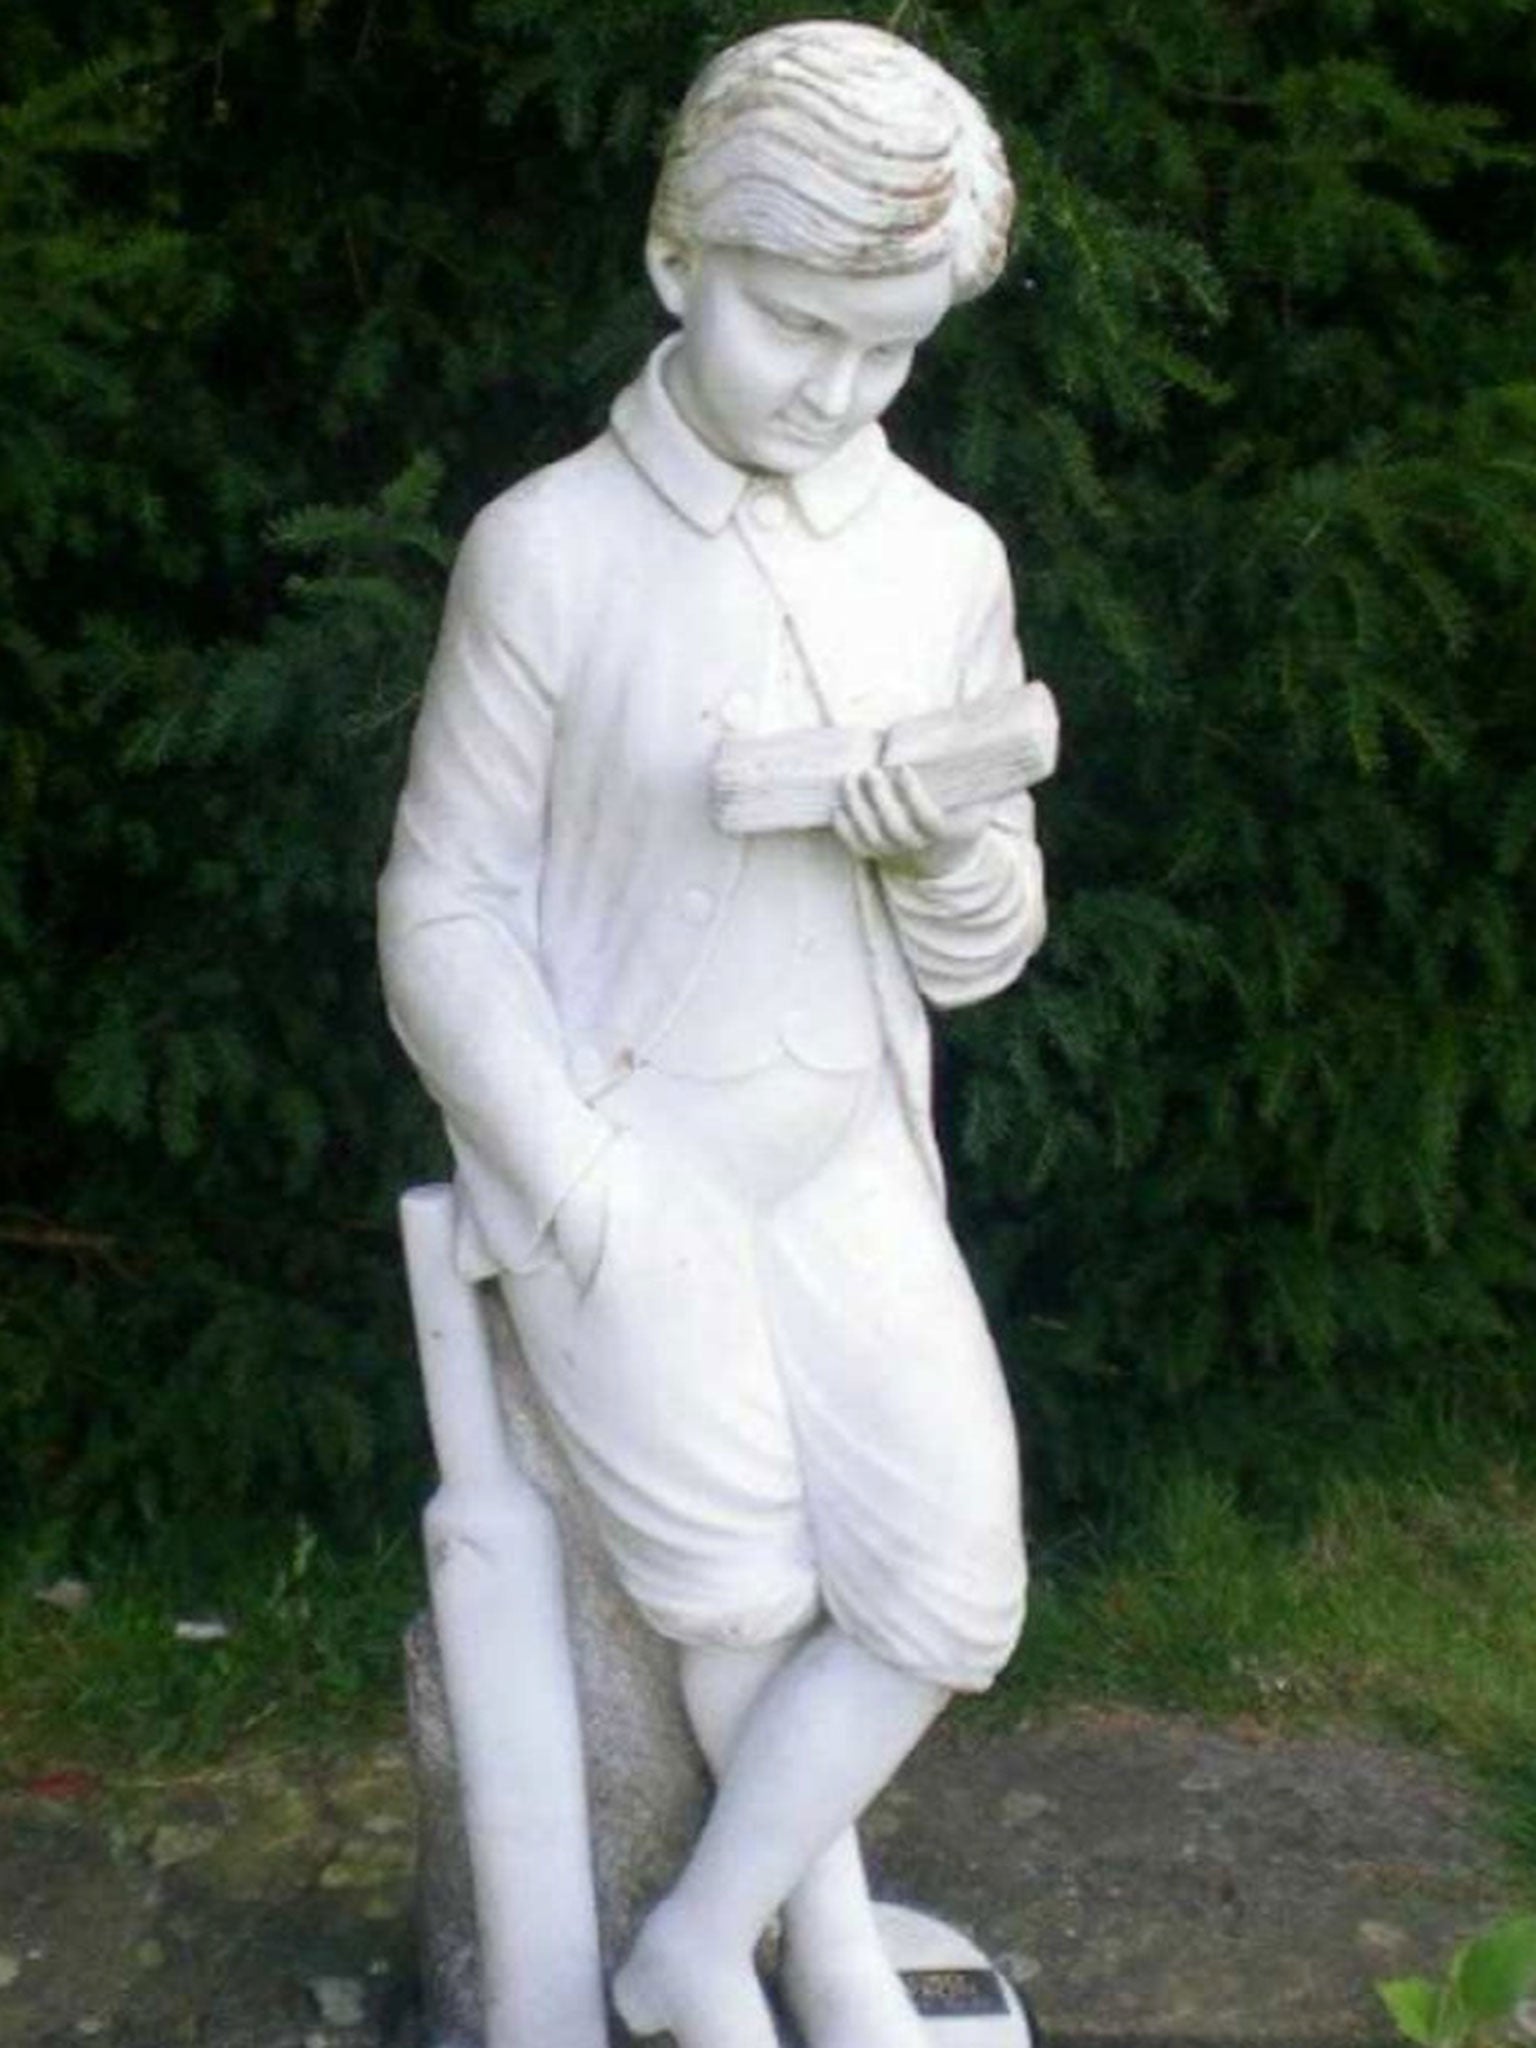 The statue of Lord Byron was stolen from Godmersham Park on Wednesday, 20 April 2016.